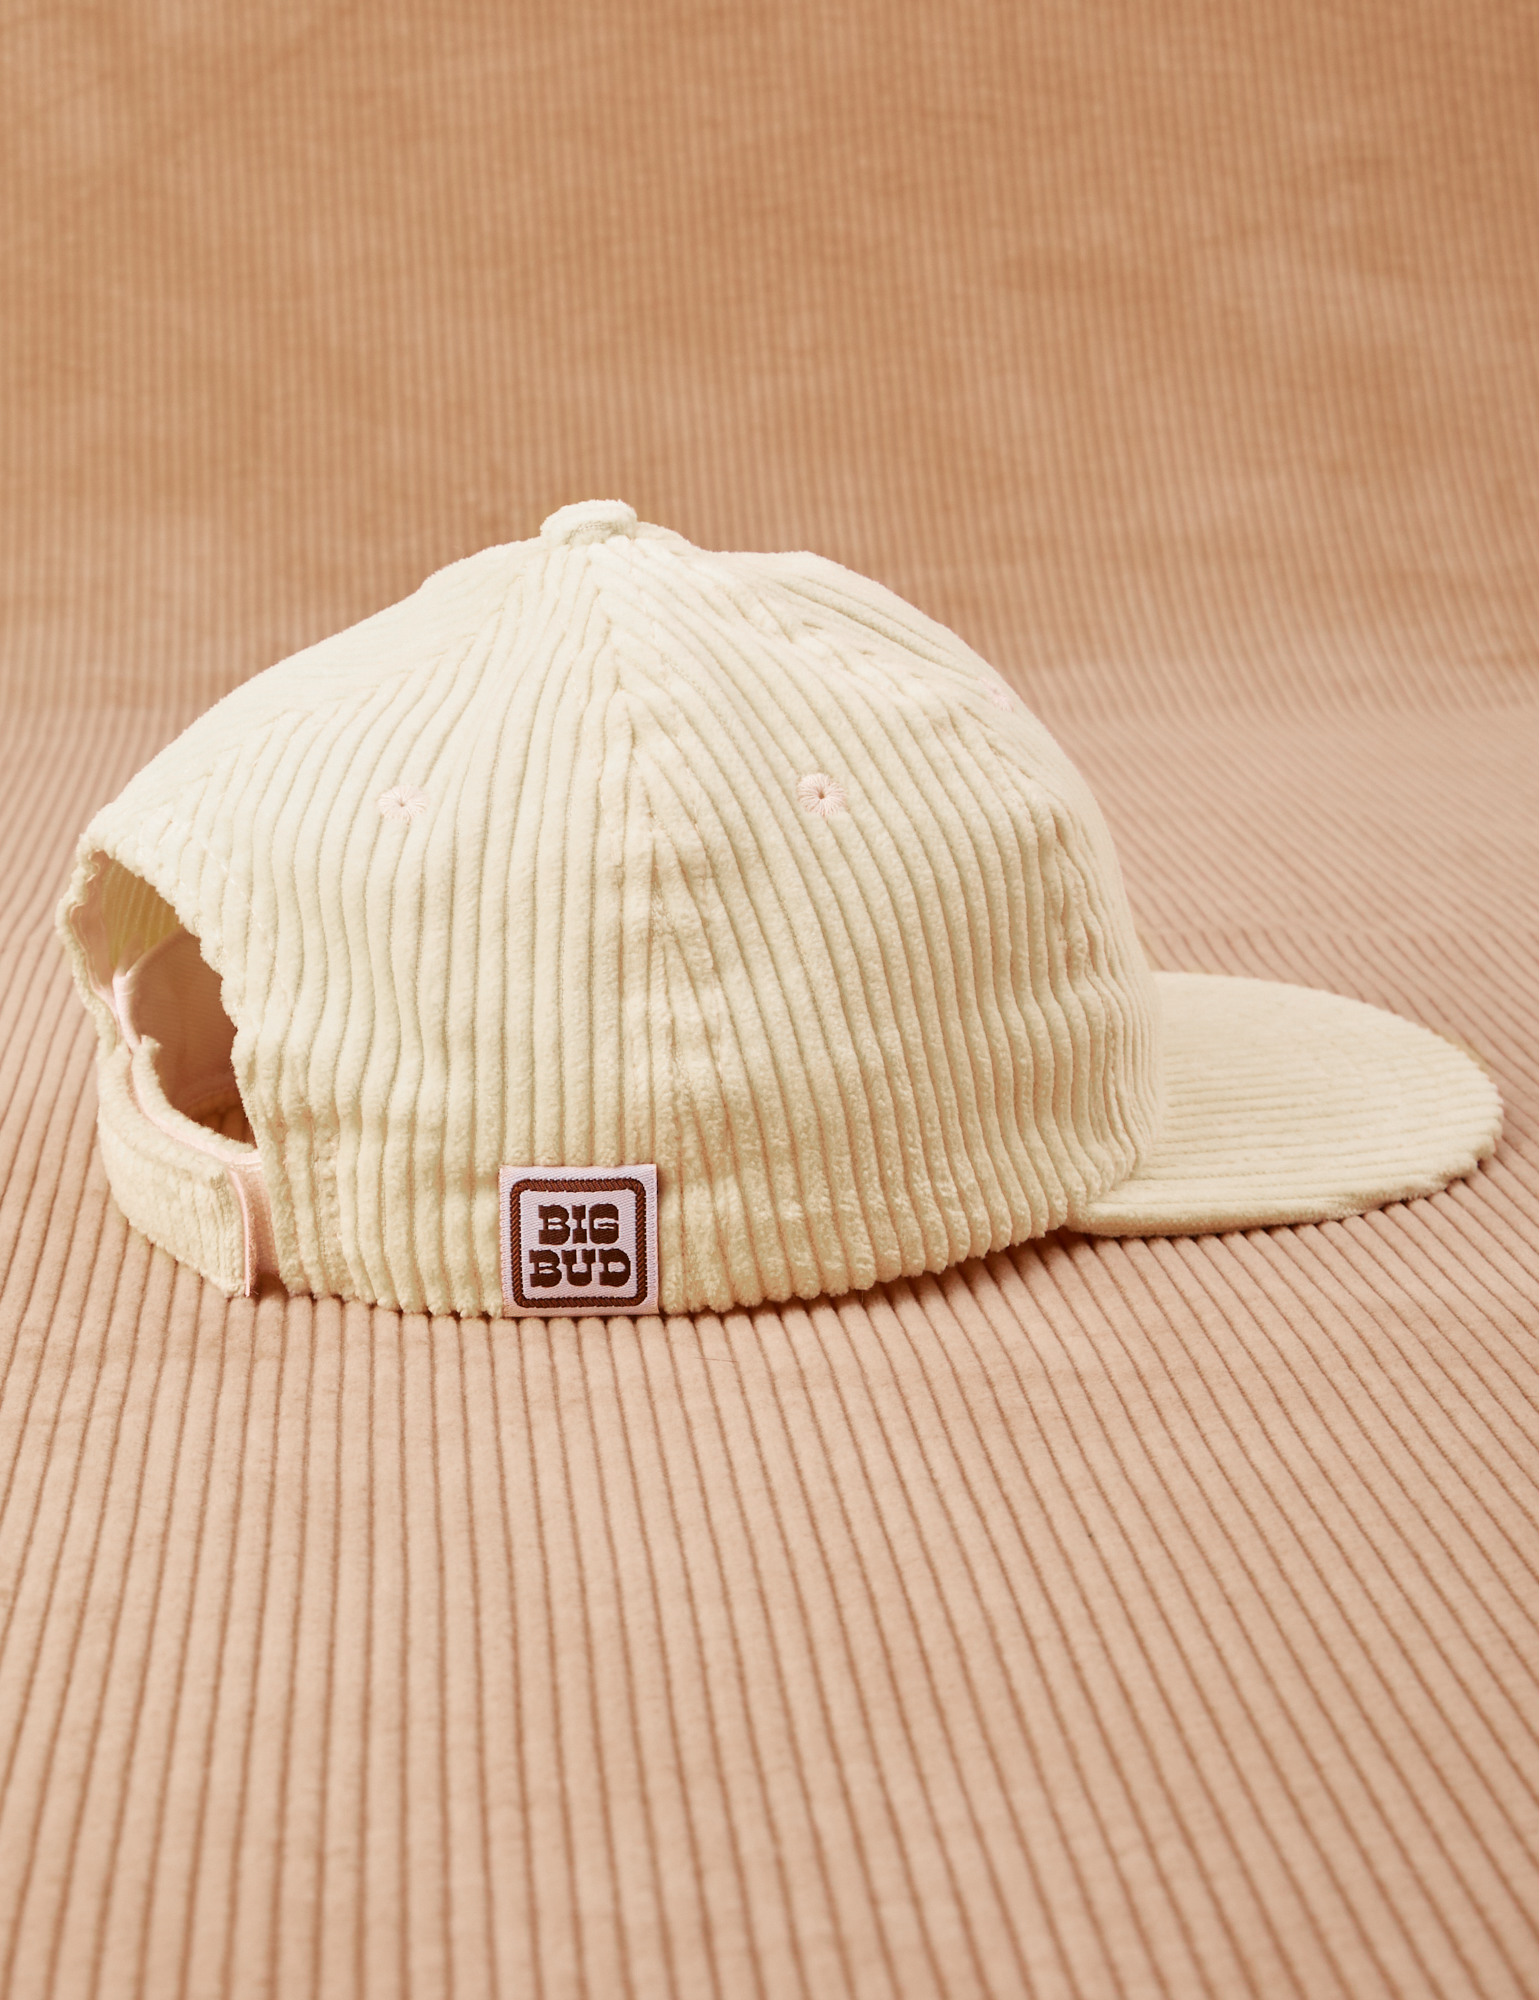 Side view of Dugout Corduroy Hat in Vintage Off-White. Big Bud label sewn onto edge of hat.